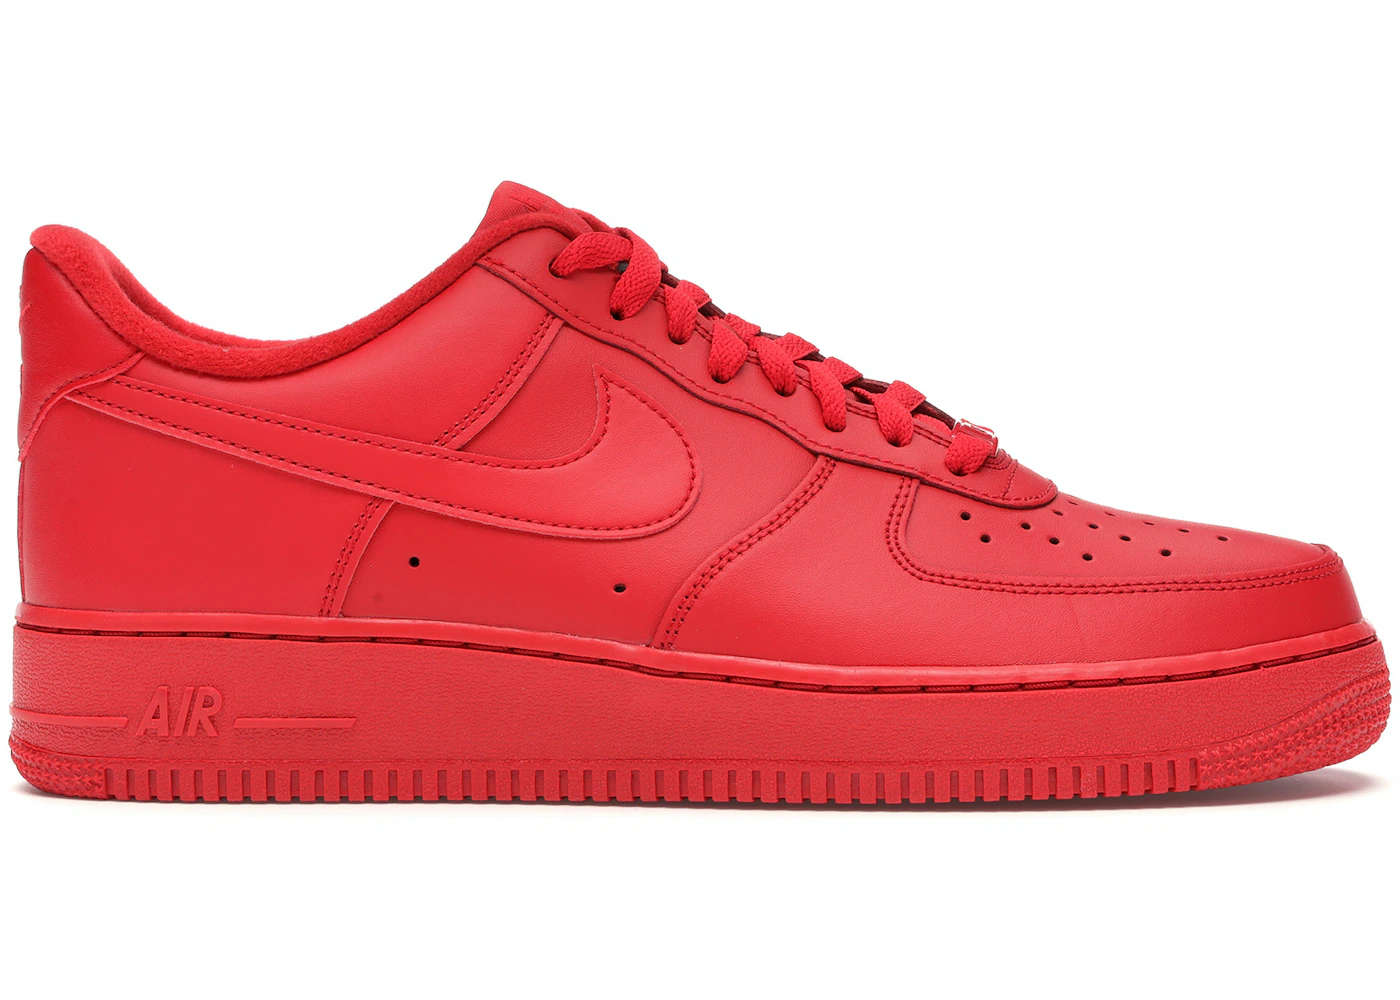 Nike Air Force 1 Low "Triple Red" 